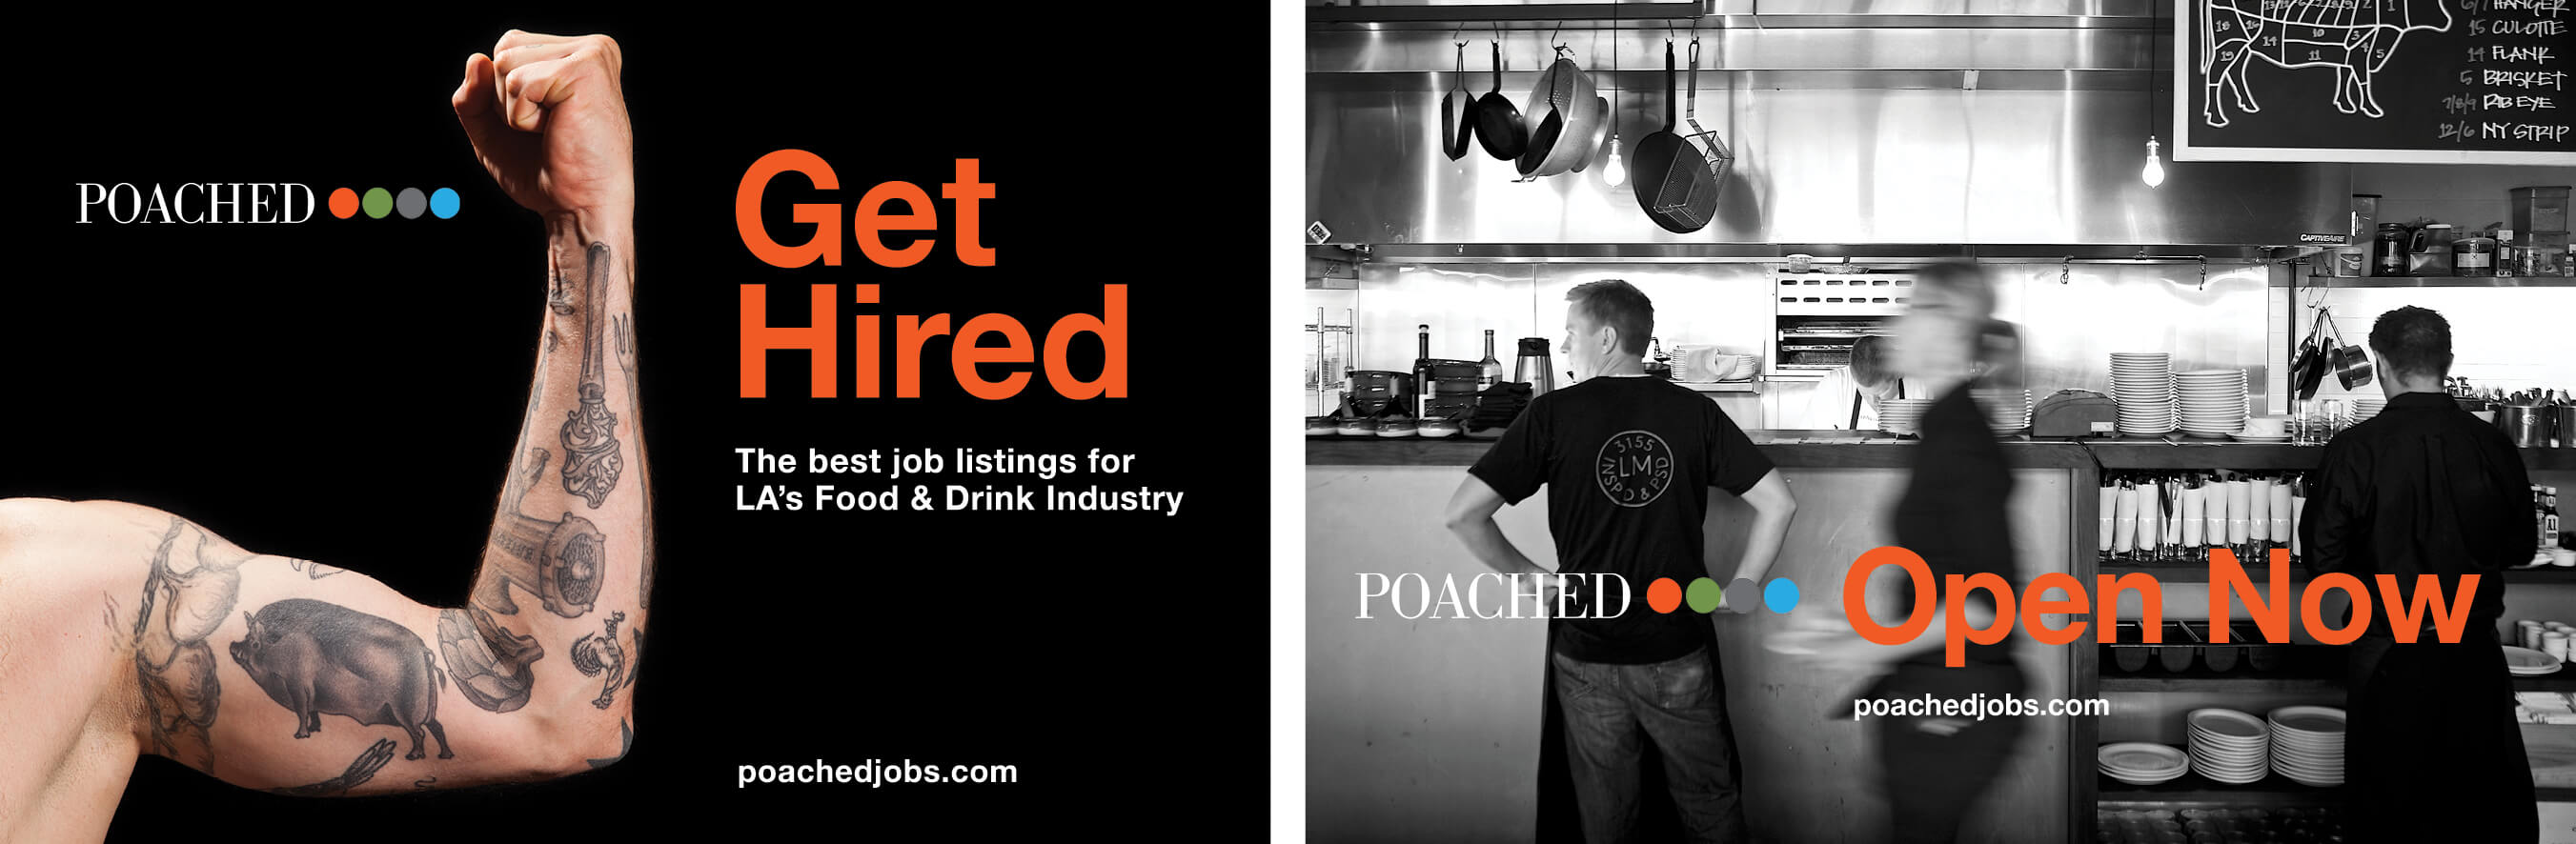 Poached jobs